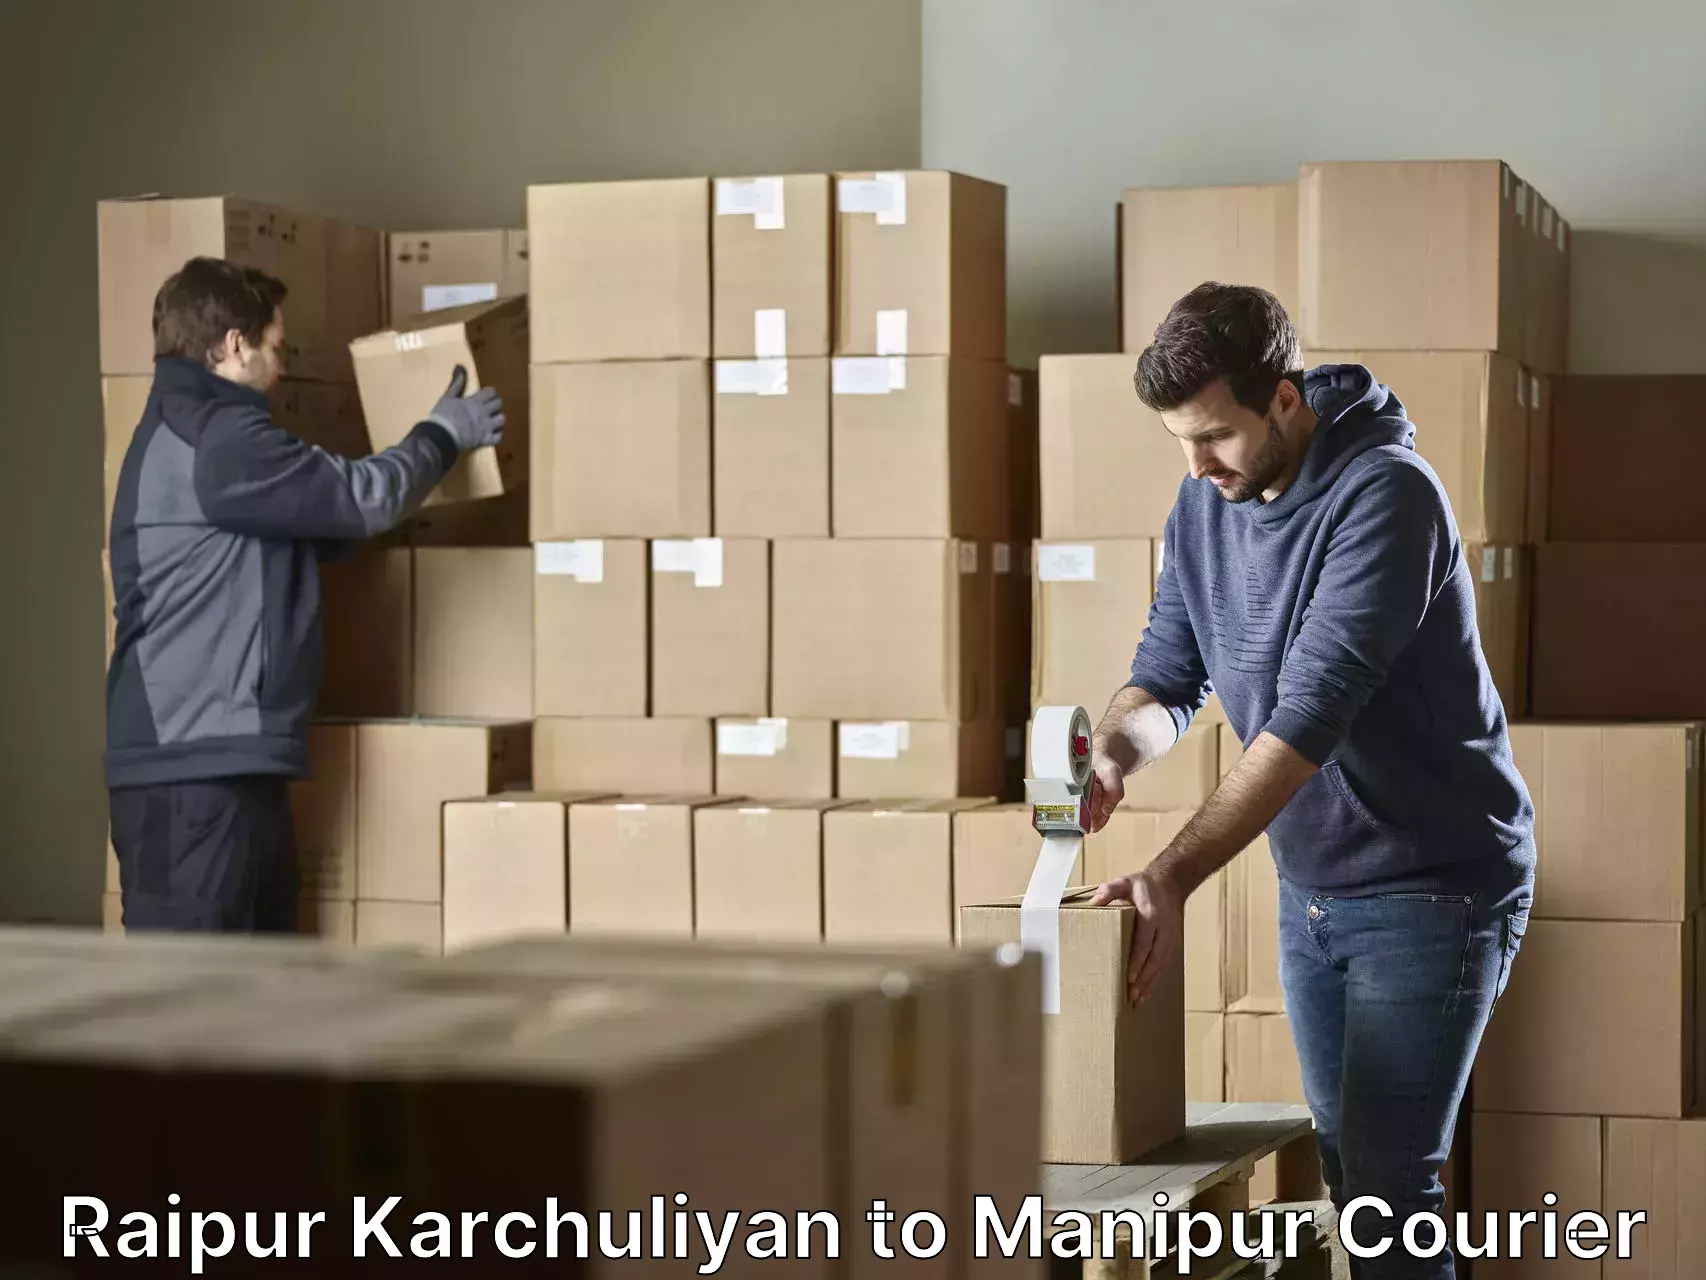 Furniture moving specialists Raipur Karchuliyan to Ukhrul